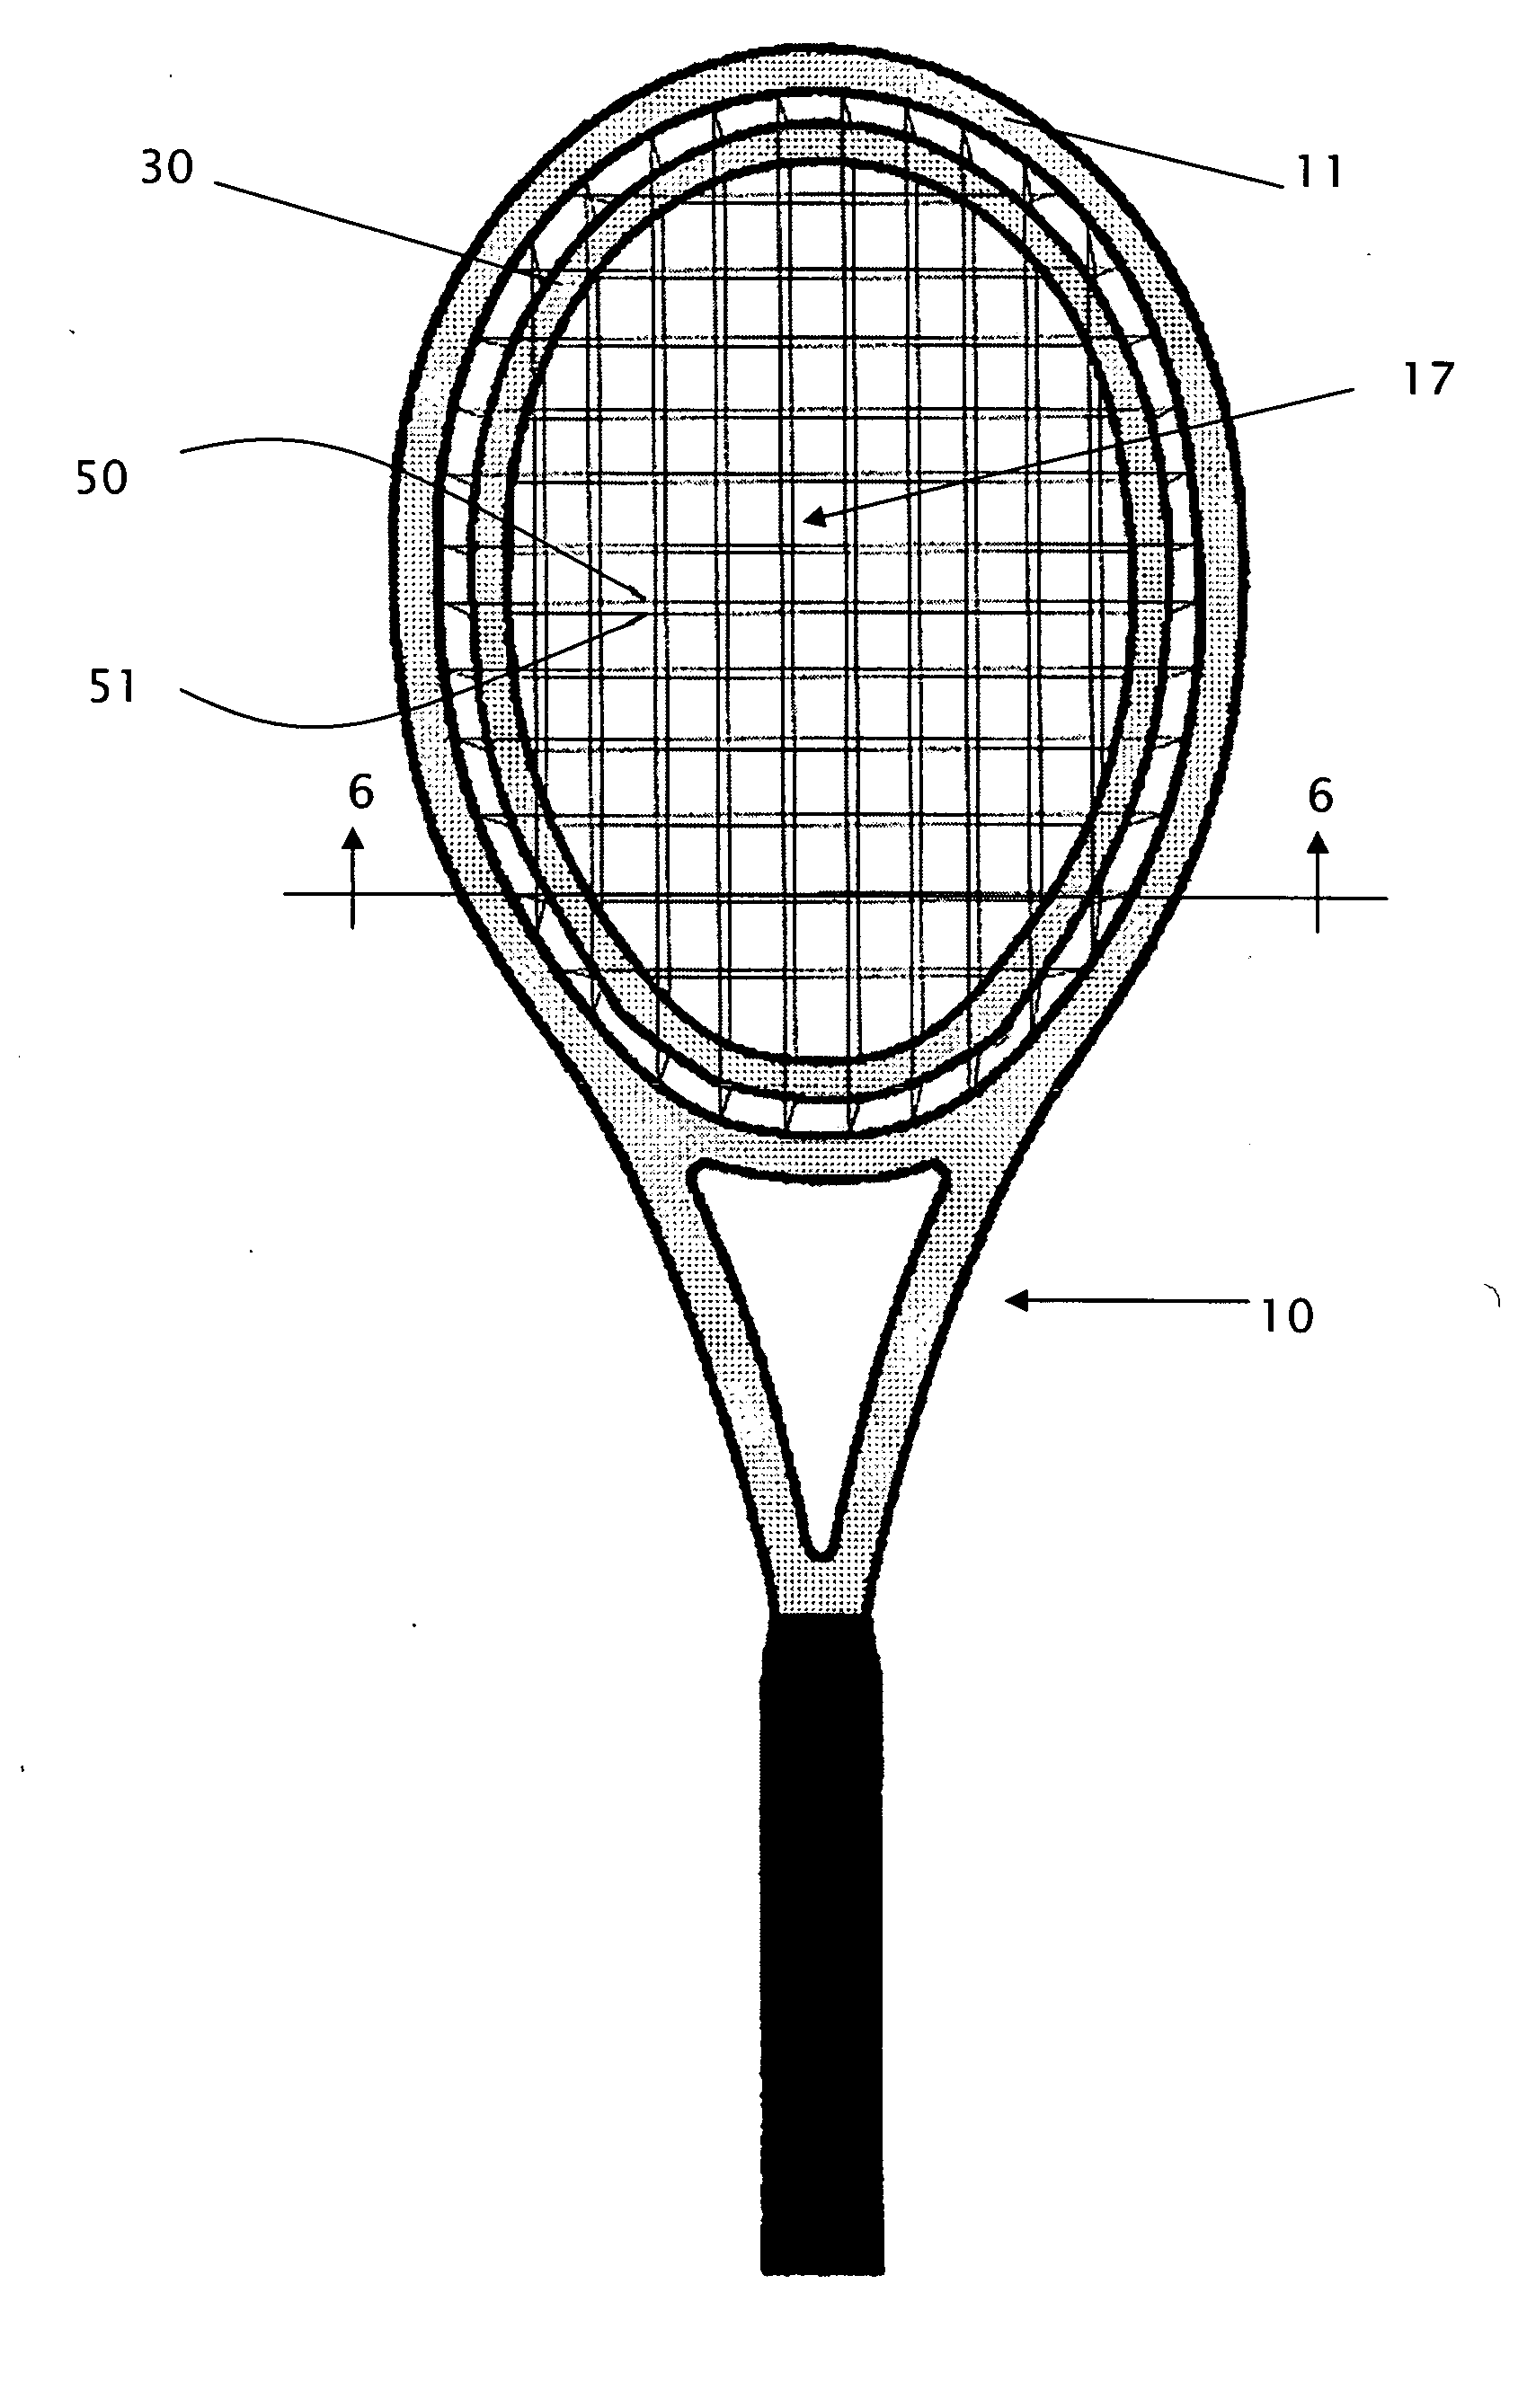 Dual-stringing conversion and playing surface separation ring for sports racquet